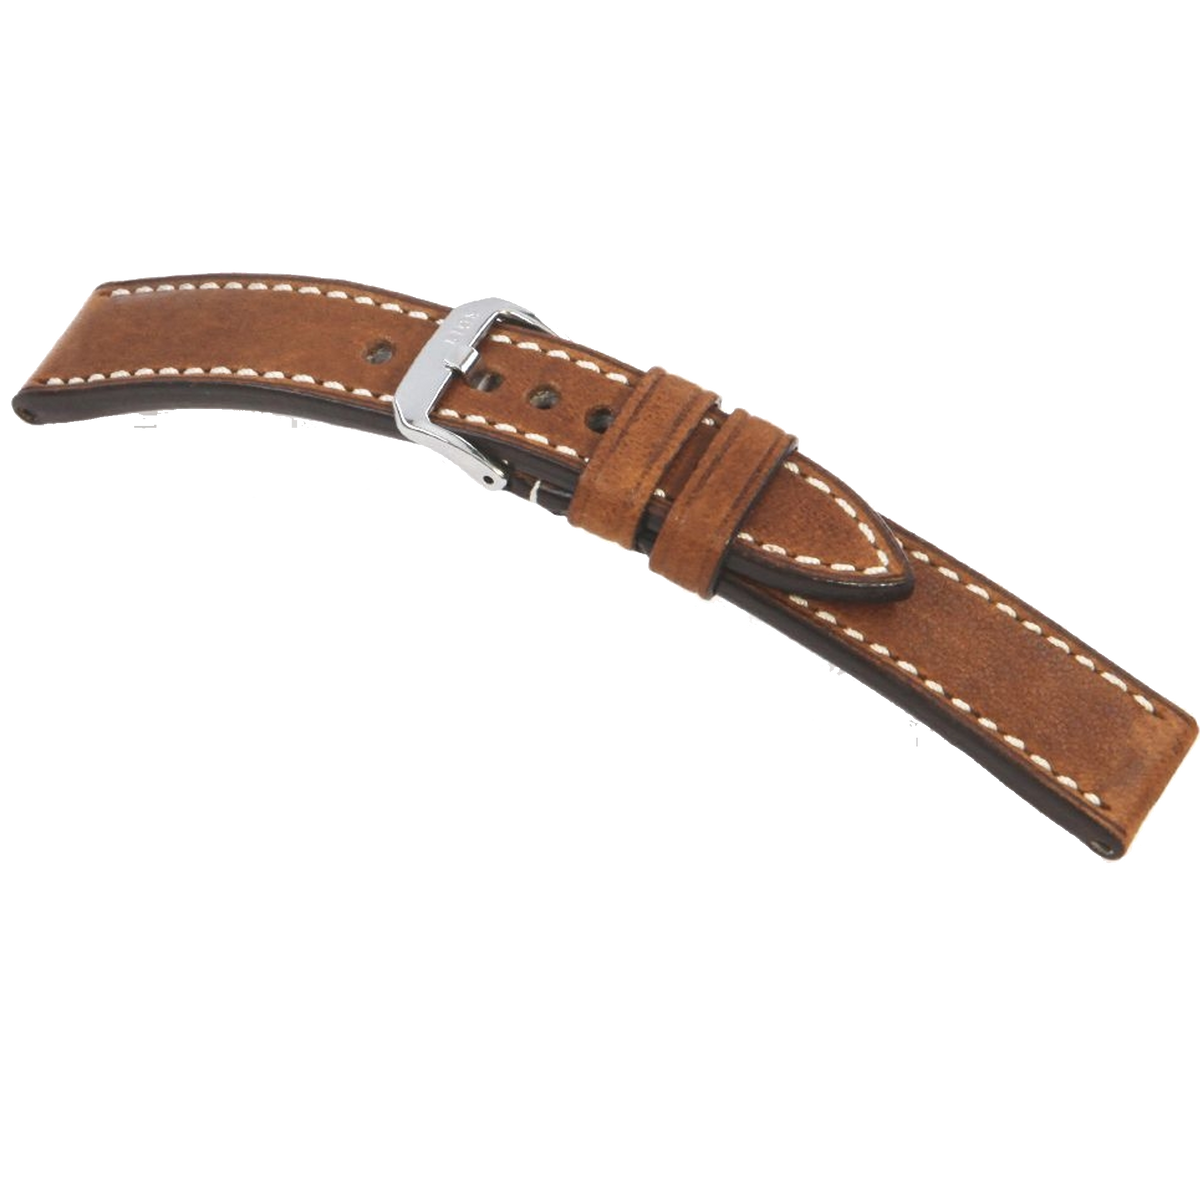 Rios 1931 Watch Bands - Oxford - Genuine Vintage Leather